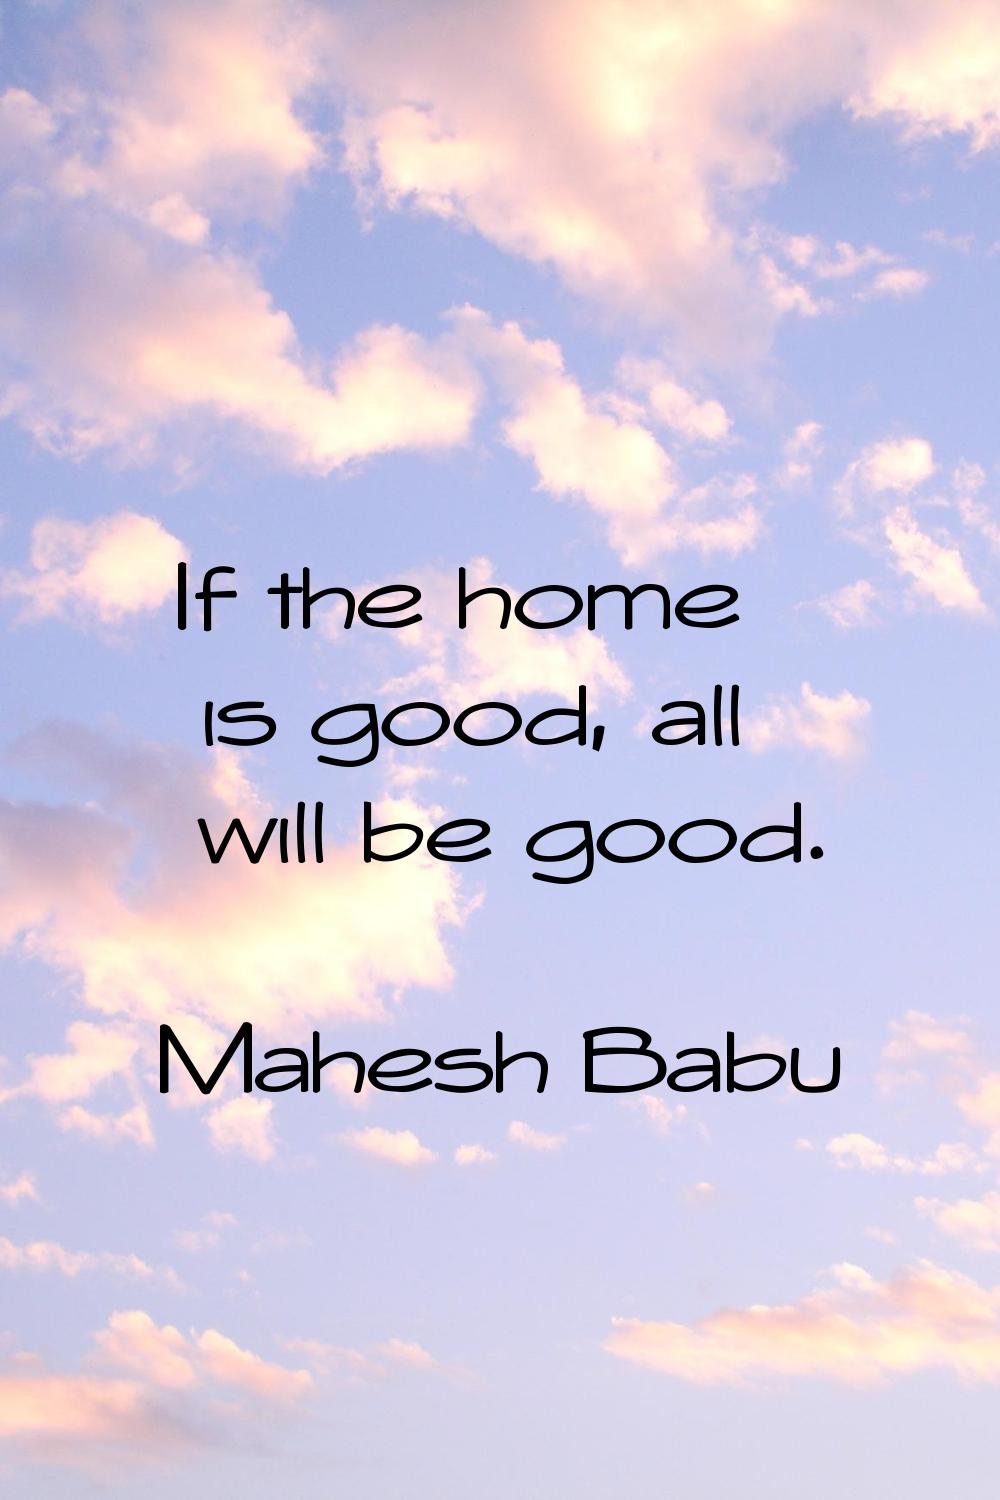 If the home is good, all will be good.